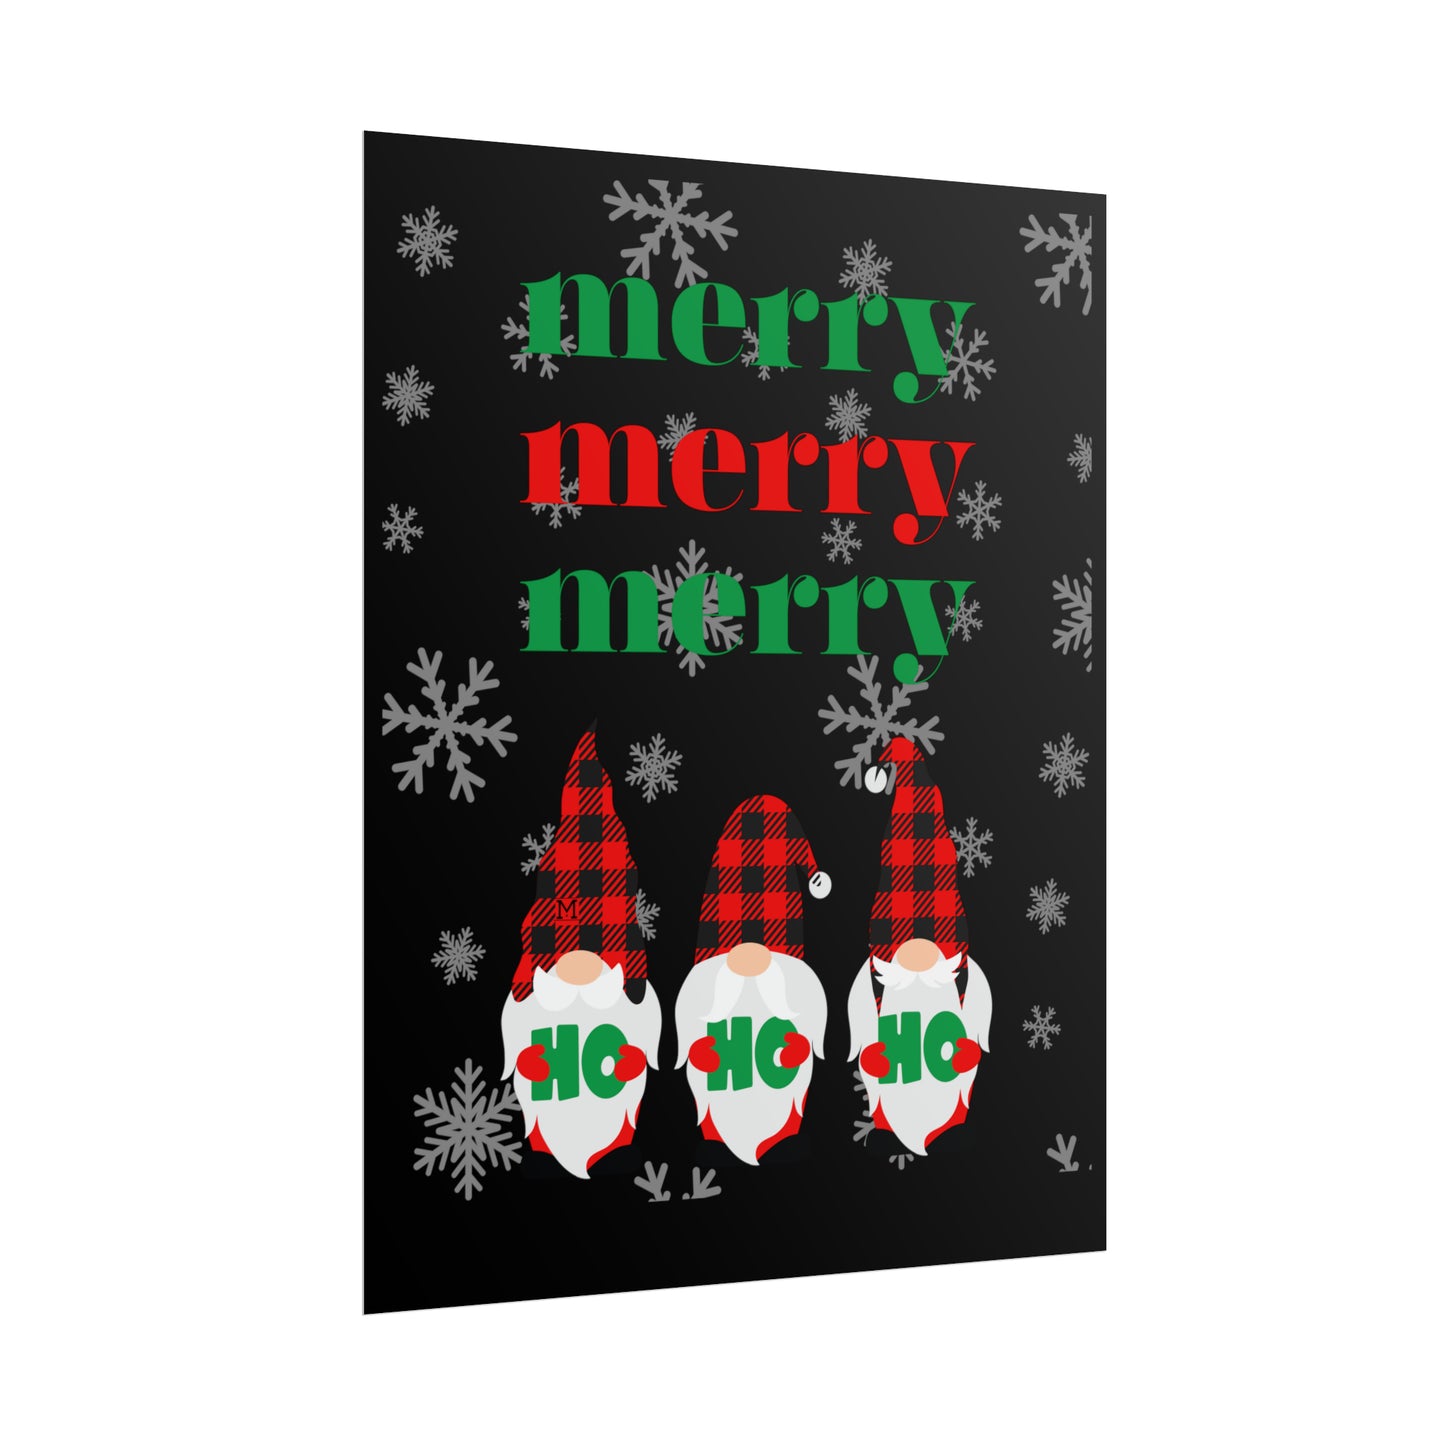 Christmas Poster 11x14" Merry Merry Merry Ho Ho Ho Rolled Posters by MII Designs